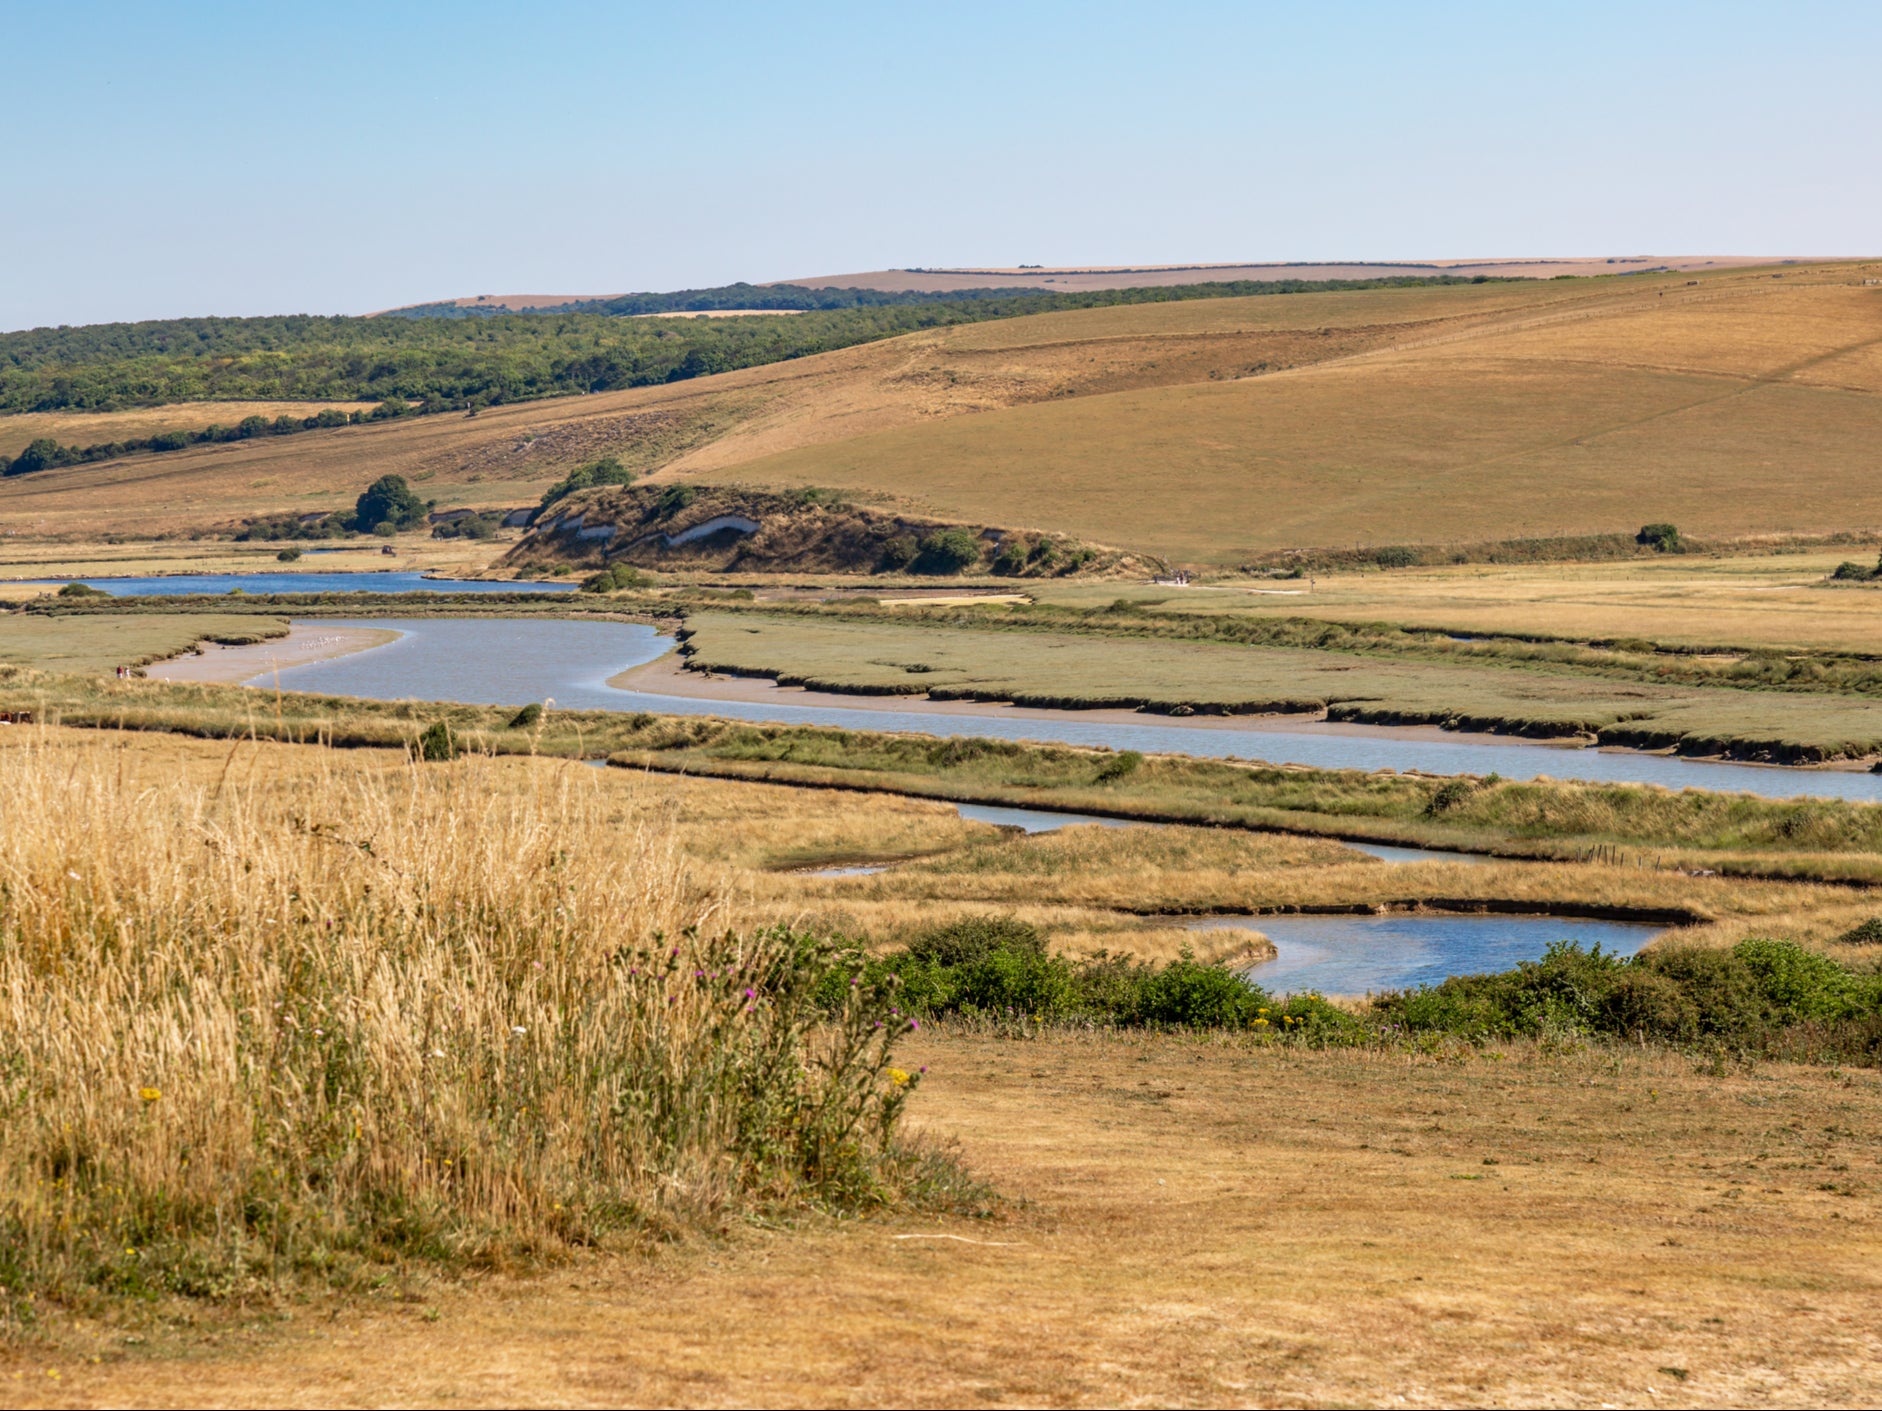 The Cuckmere river in East Sussex. The region is subject to a hosepipe ban